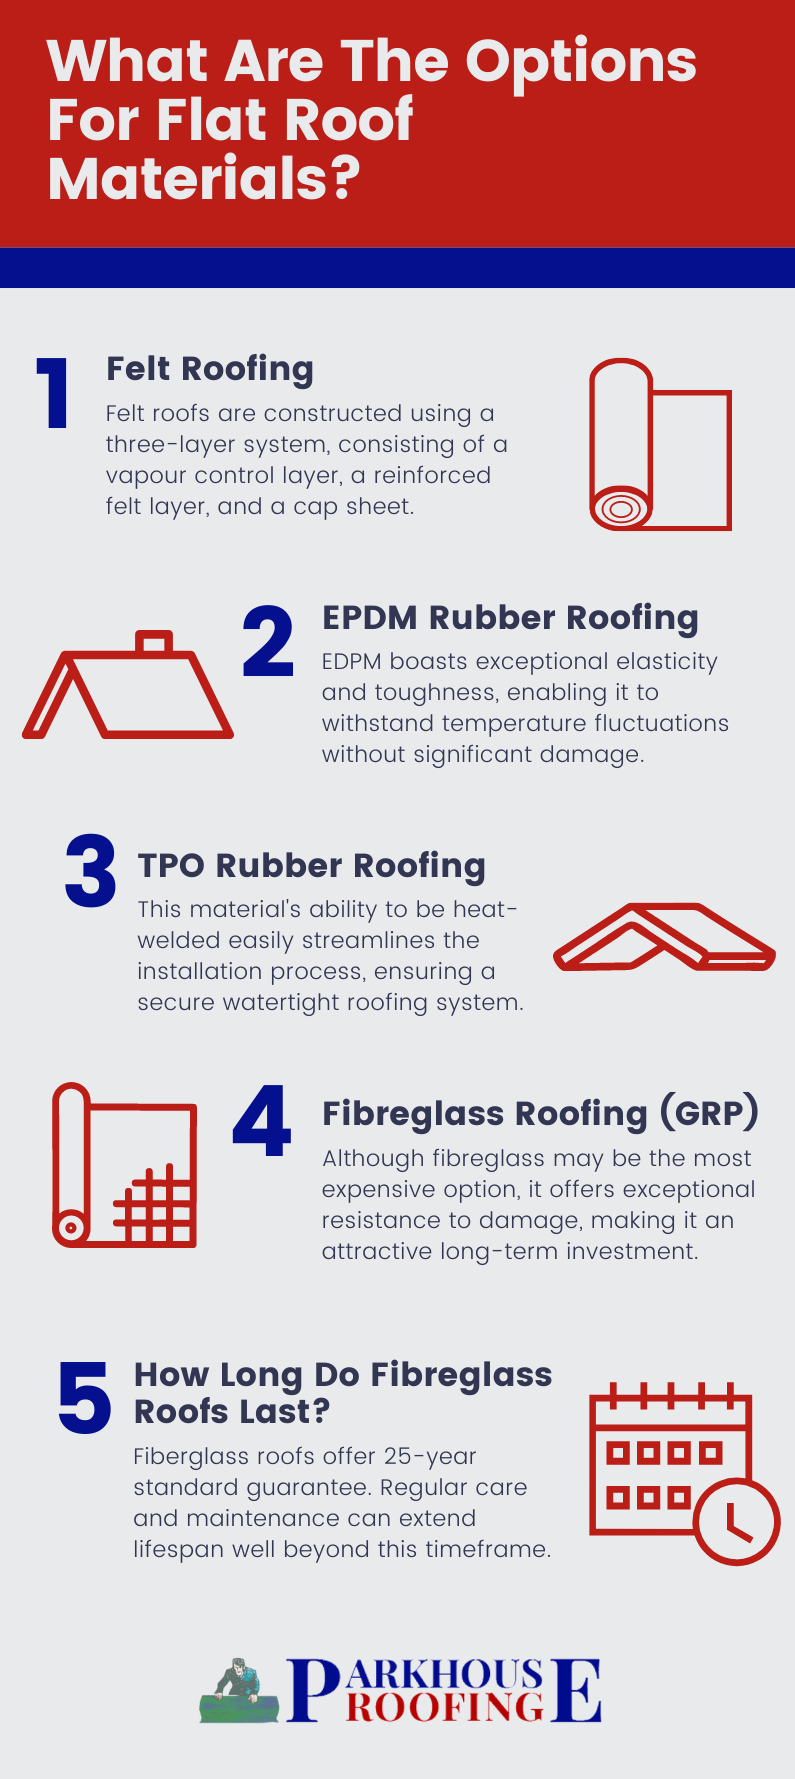 What Are The Options For Flat Roof Materials?